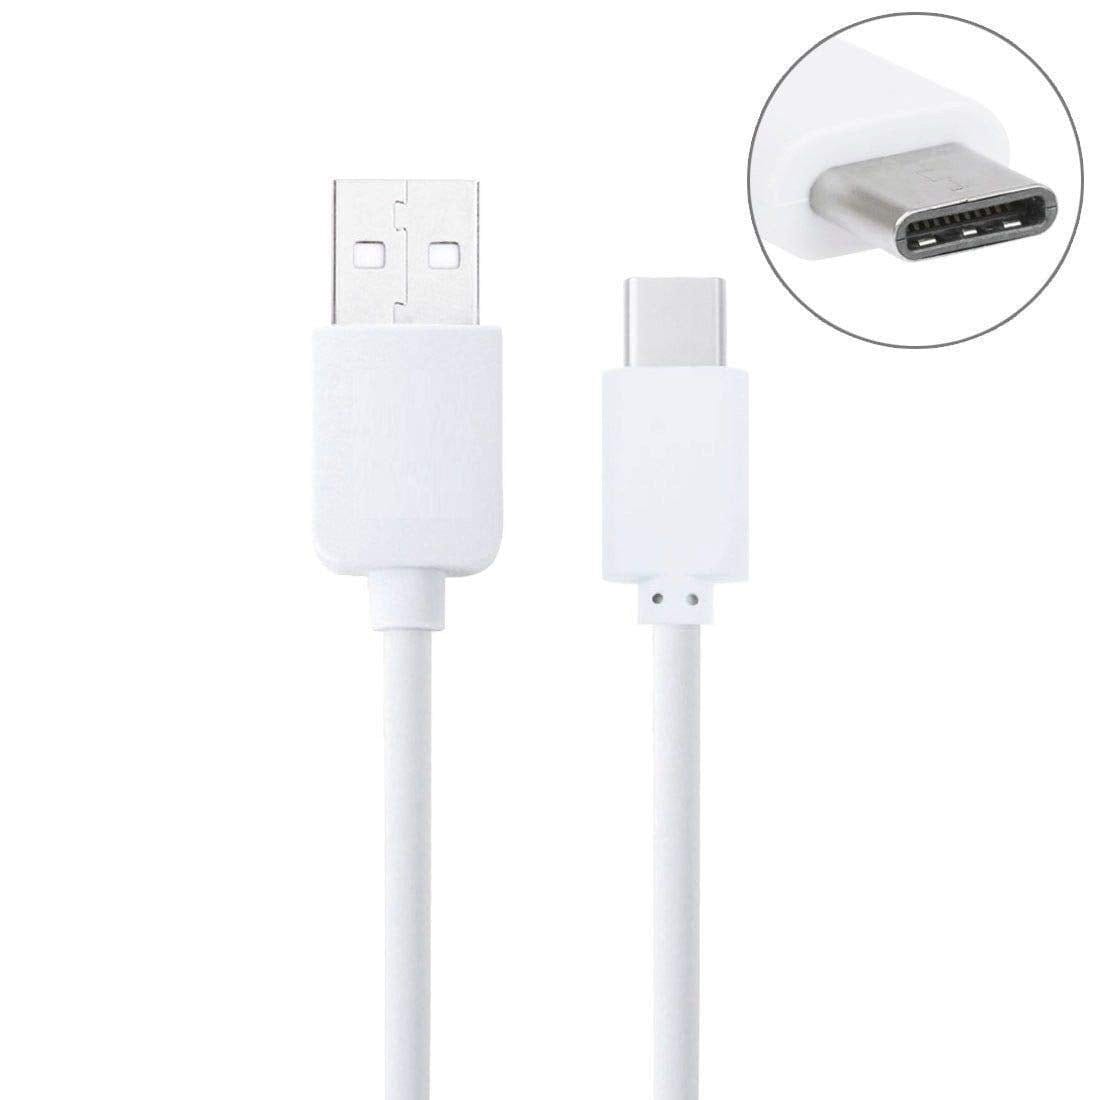 Samsung Galaxy A21s USB to Type C Phone Charger Charging Cable In Car White - 50 CM Short - SmartPhoneGadgetUK